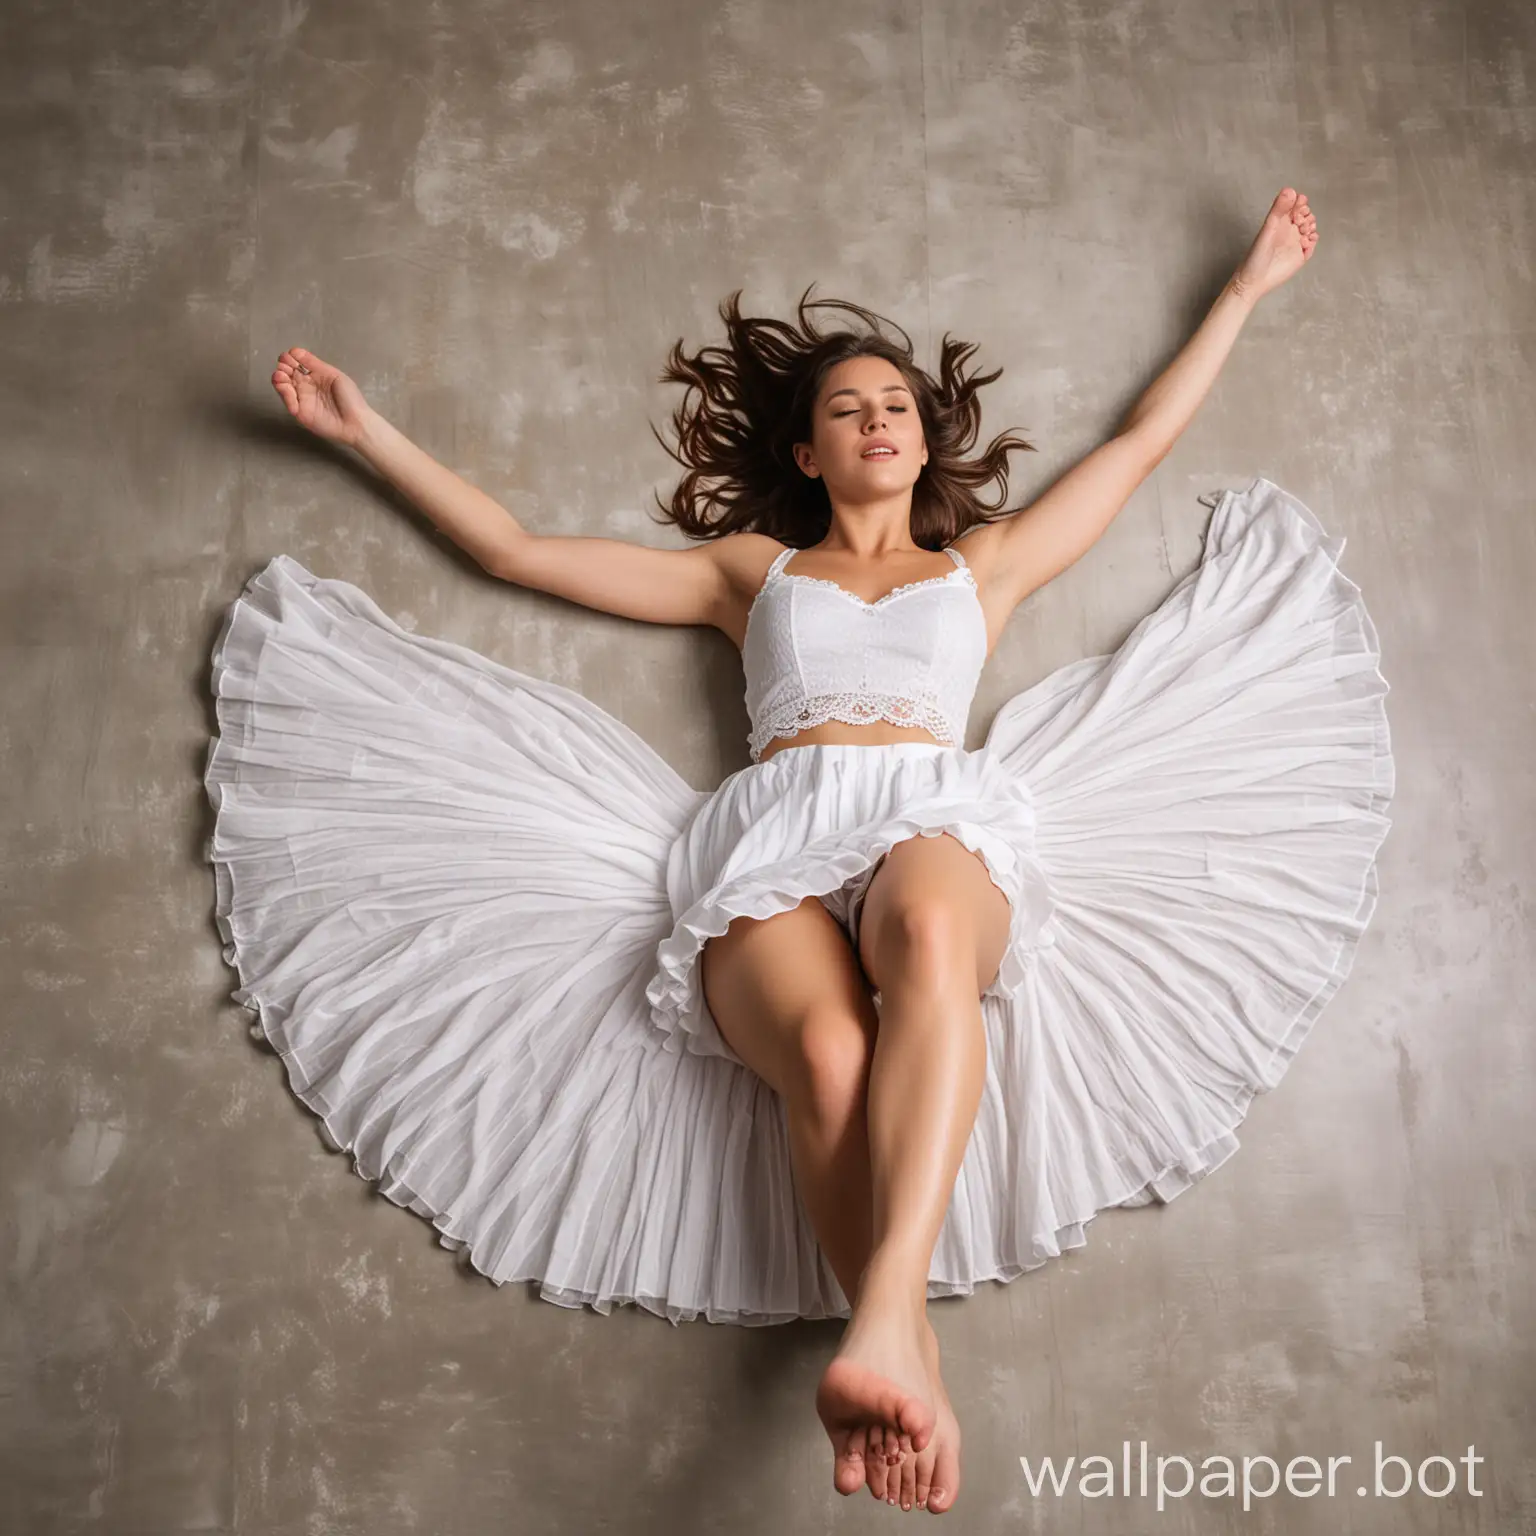 Girl laying on her back clasping her bare feet that's flat on the floor and knees up in the air wearing a white skirt in a photo shoot